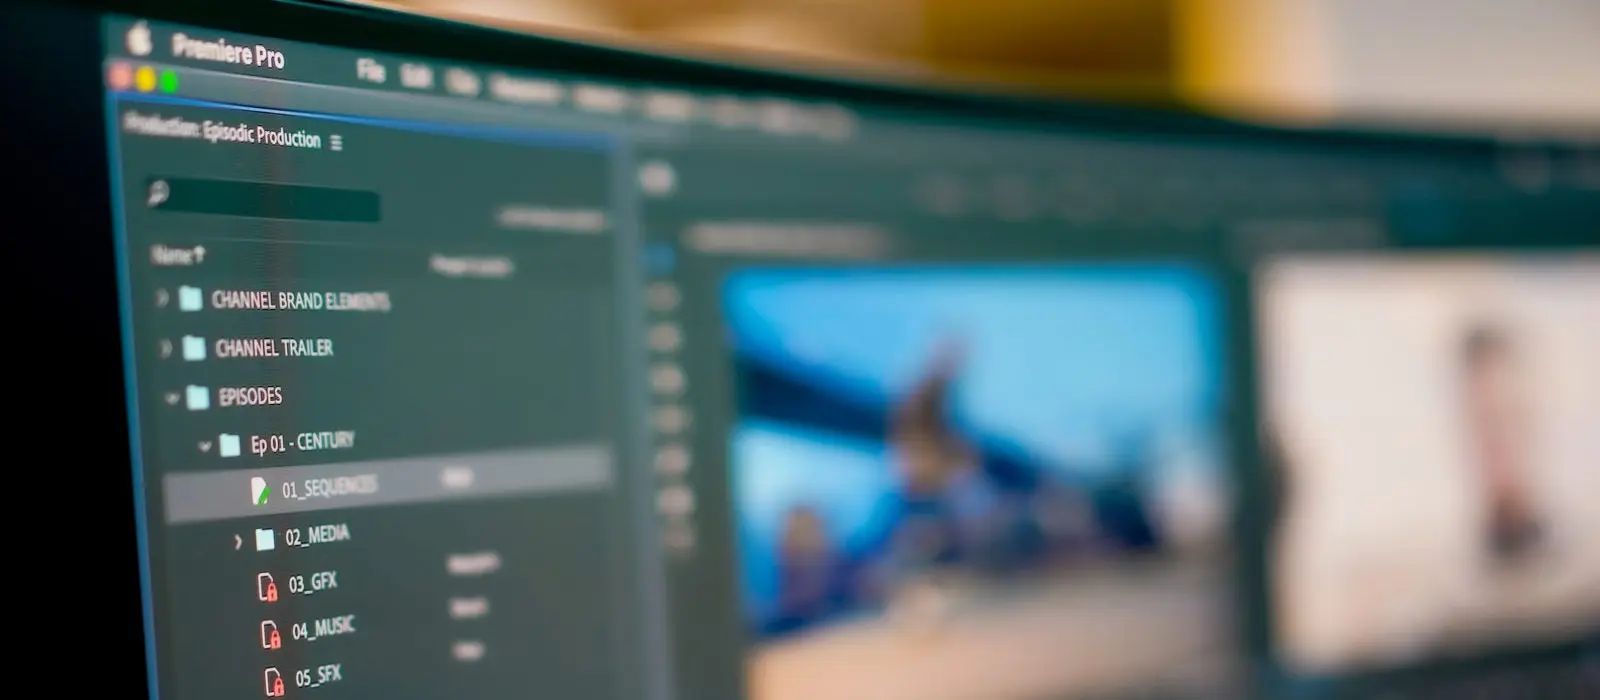 Image of Premiere Pro being used on a computer.